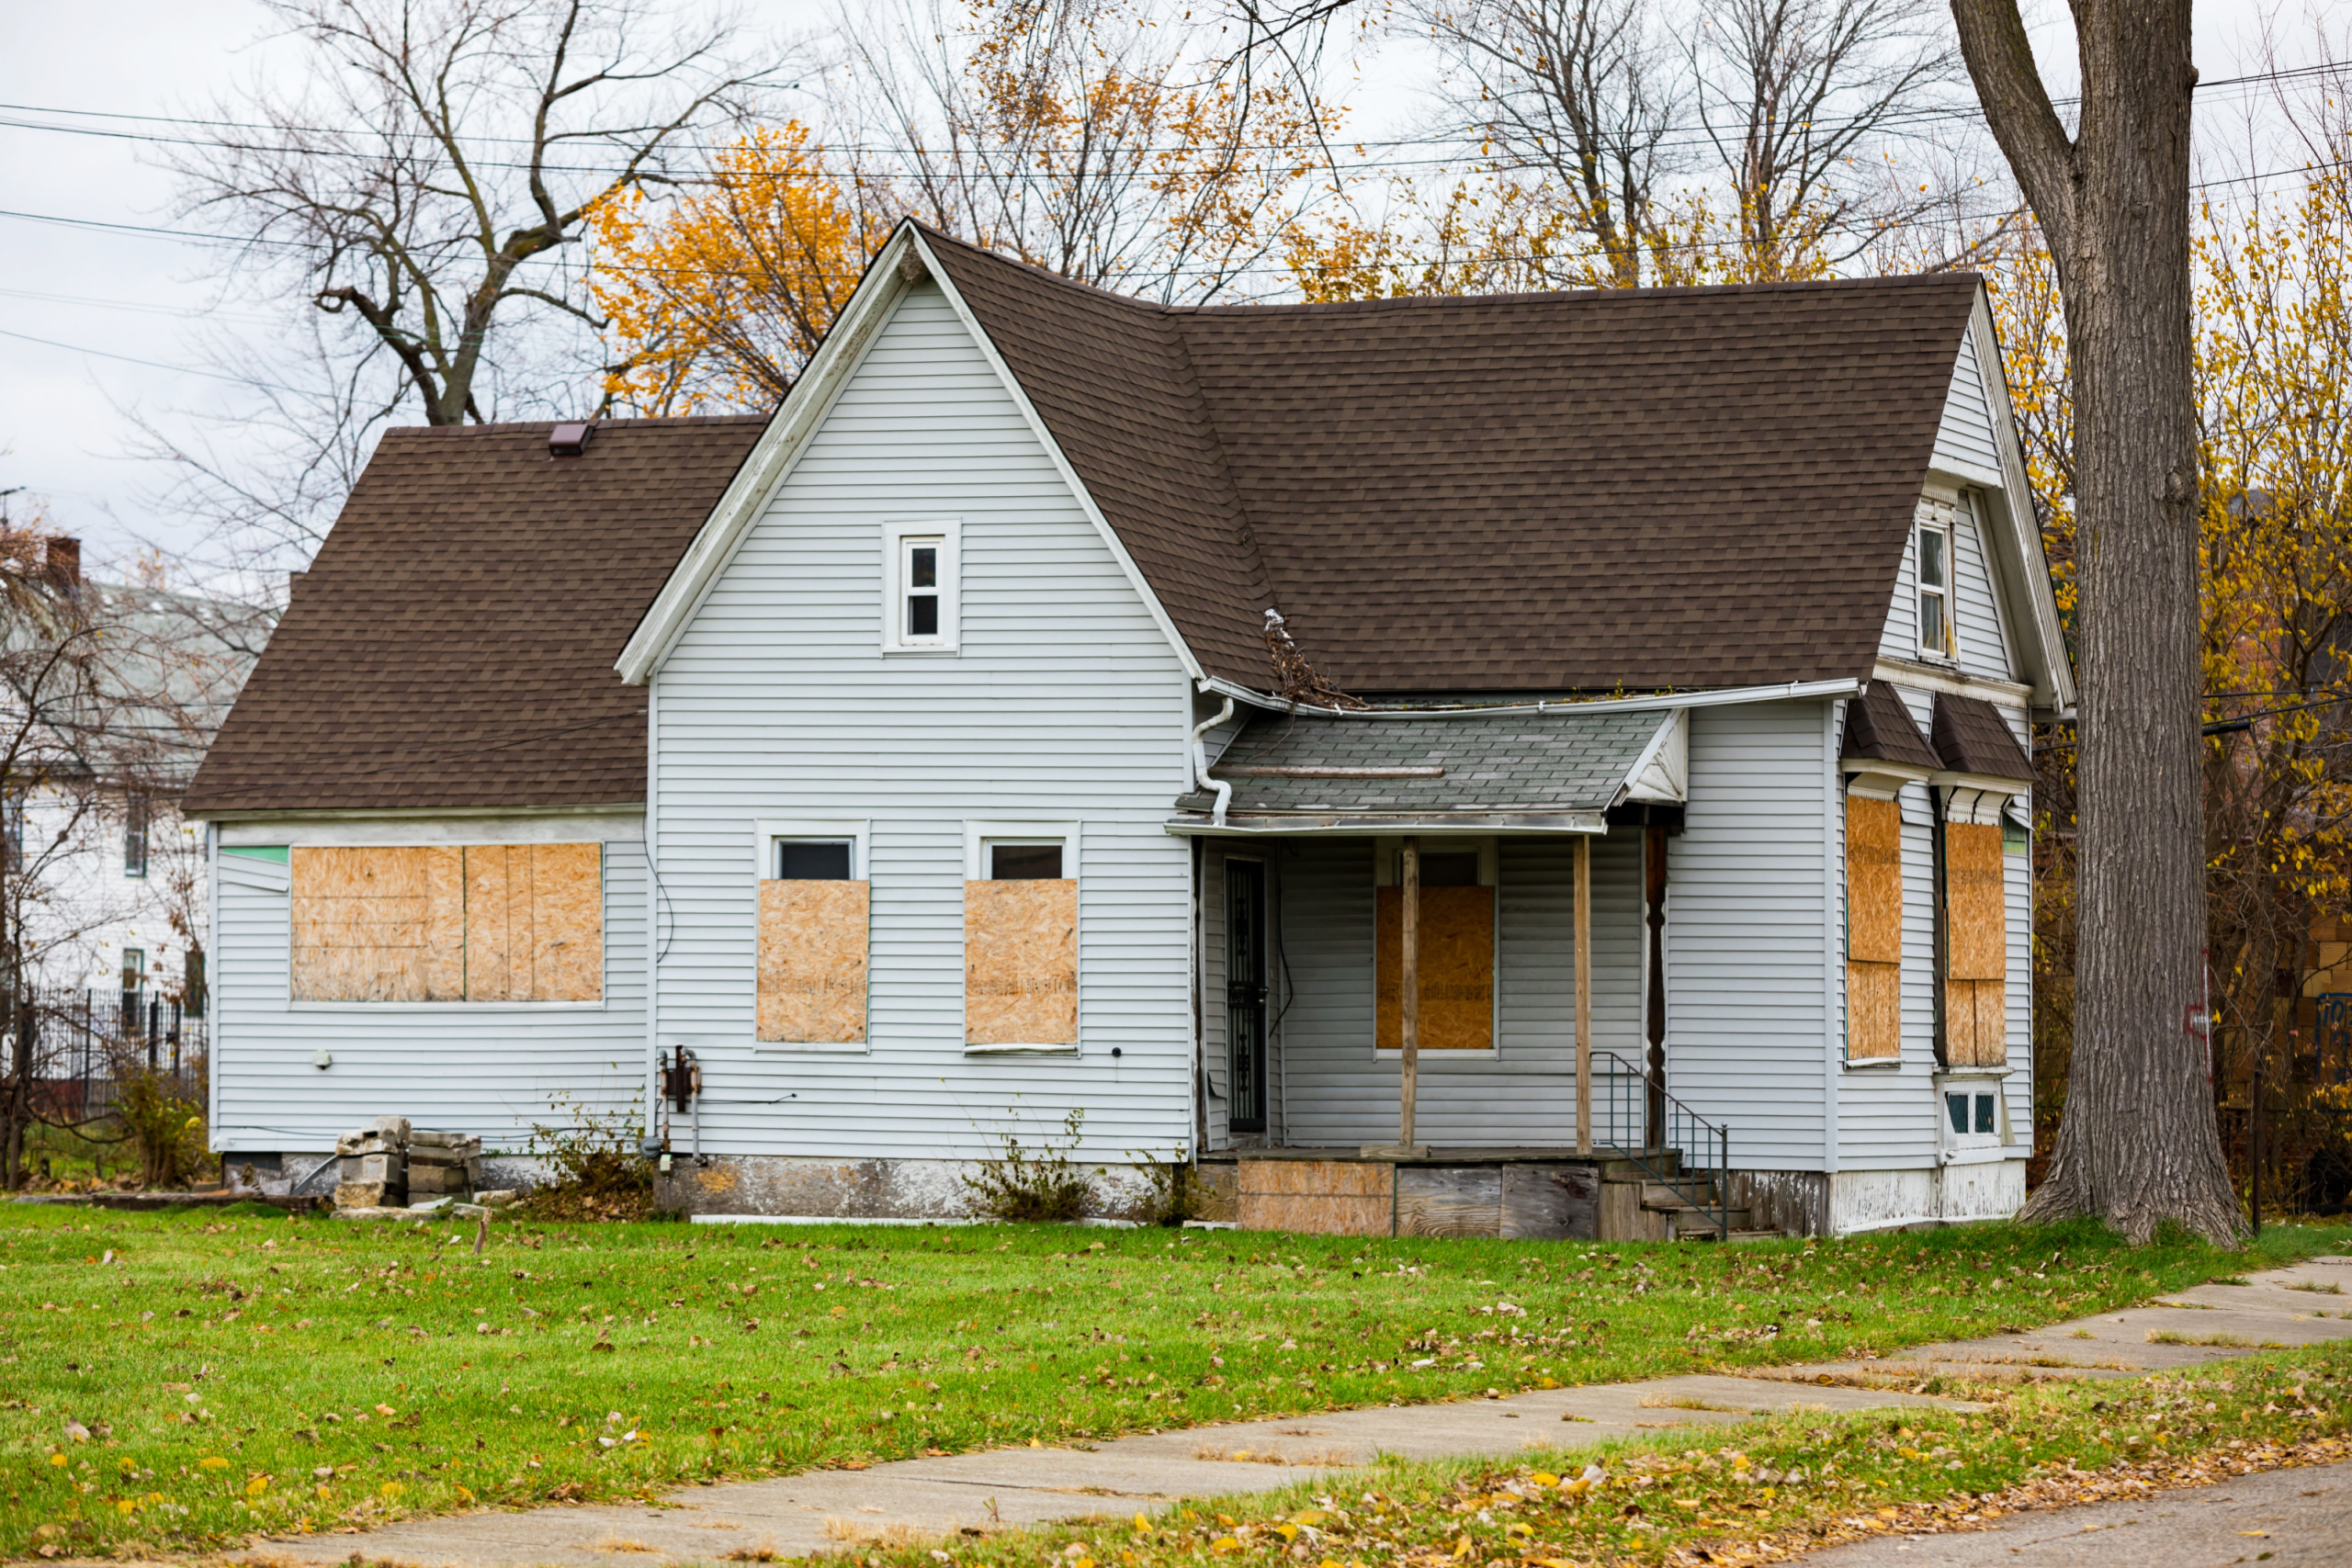 Sell Your Unwanted or Ugly Property in St. Louis, MO, for Fast Cash